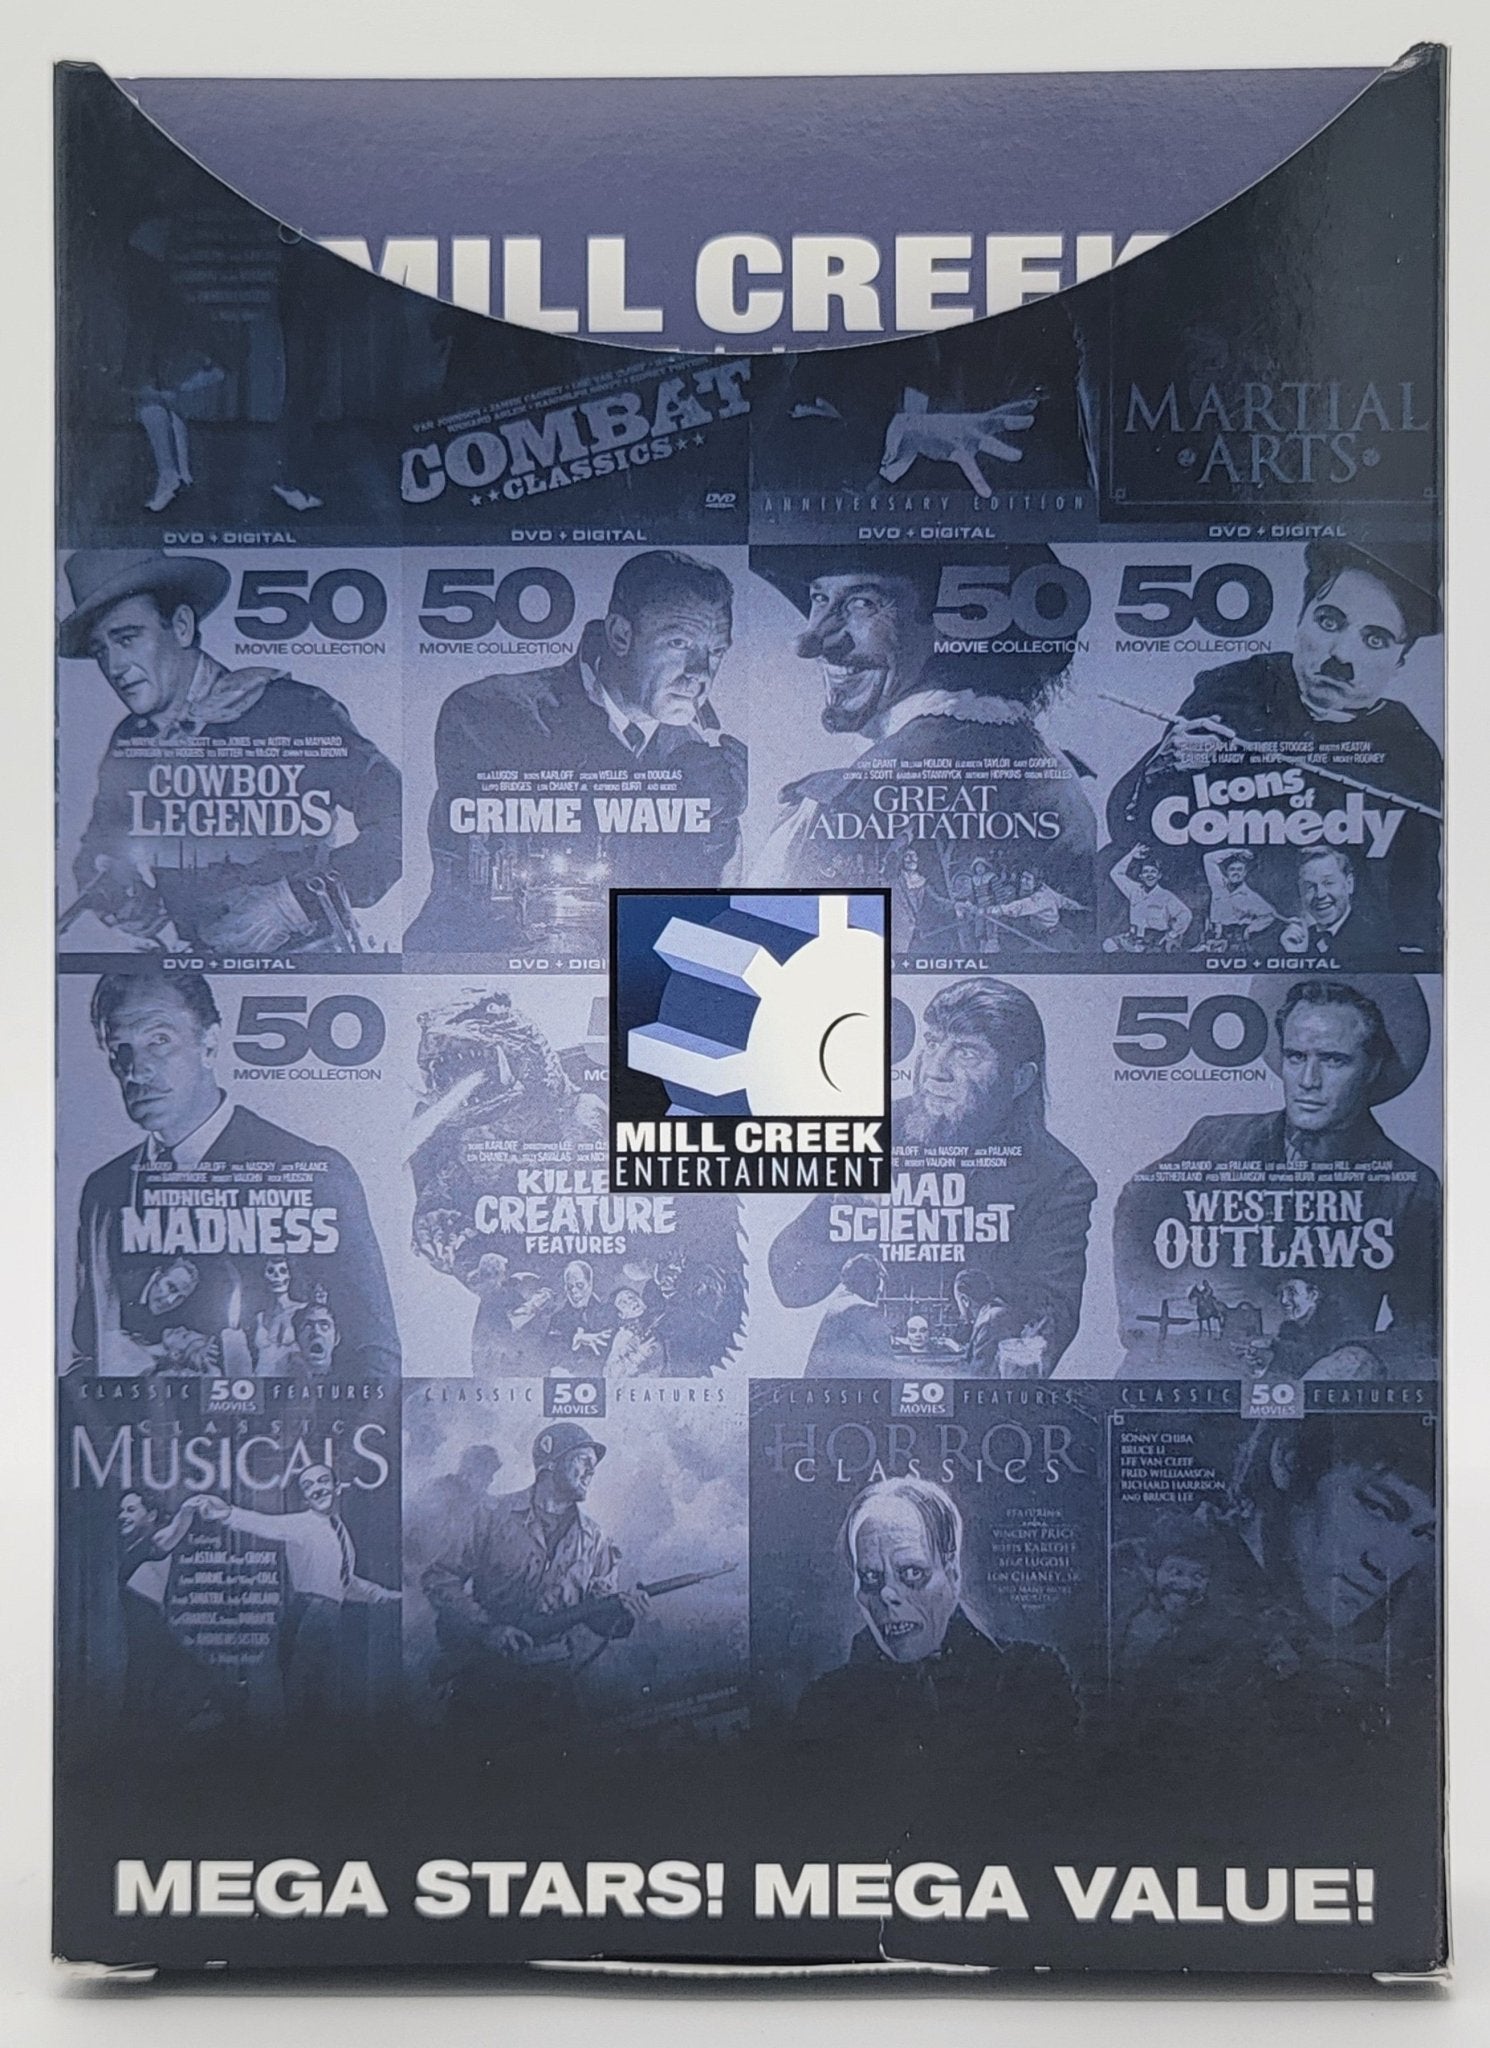 Mill Creek Entertainment - 50 Movie Collection - Midnight Movies Madness - Mega Stars | DVD | 1936 - 1990 - dvd - Steady Bunny Shop